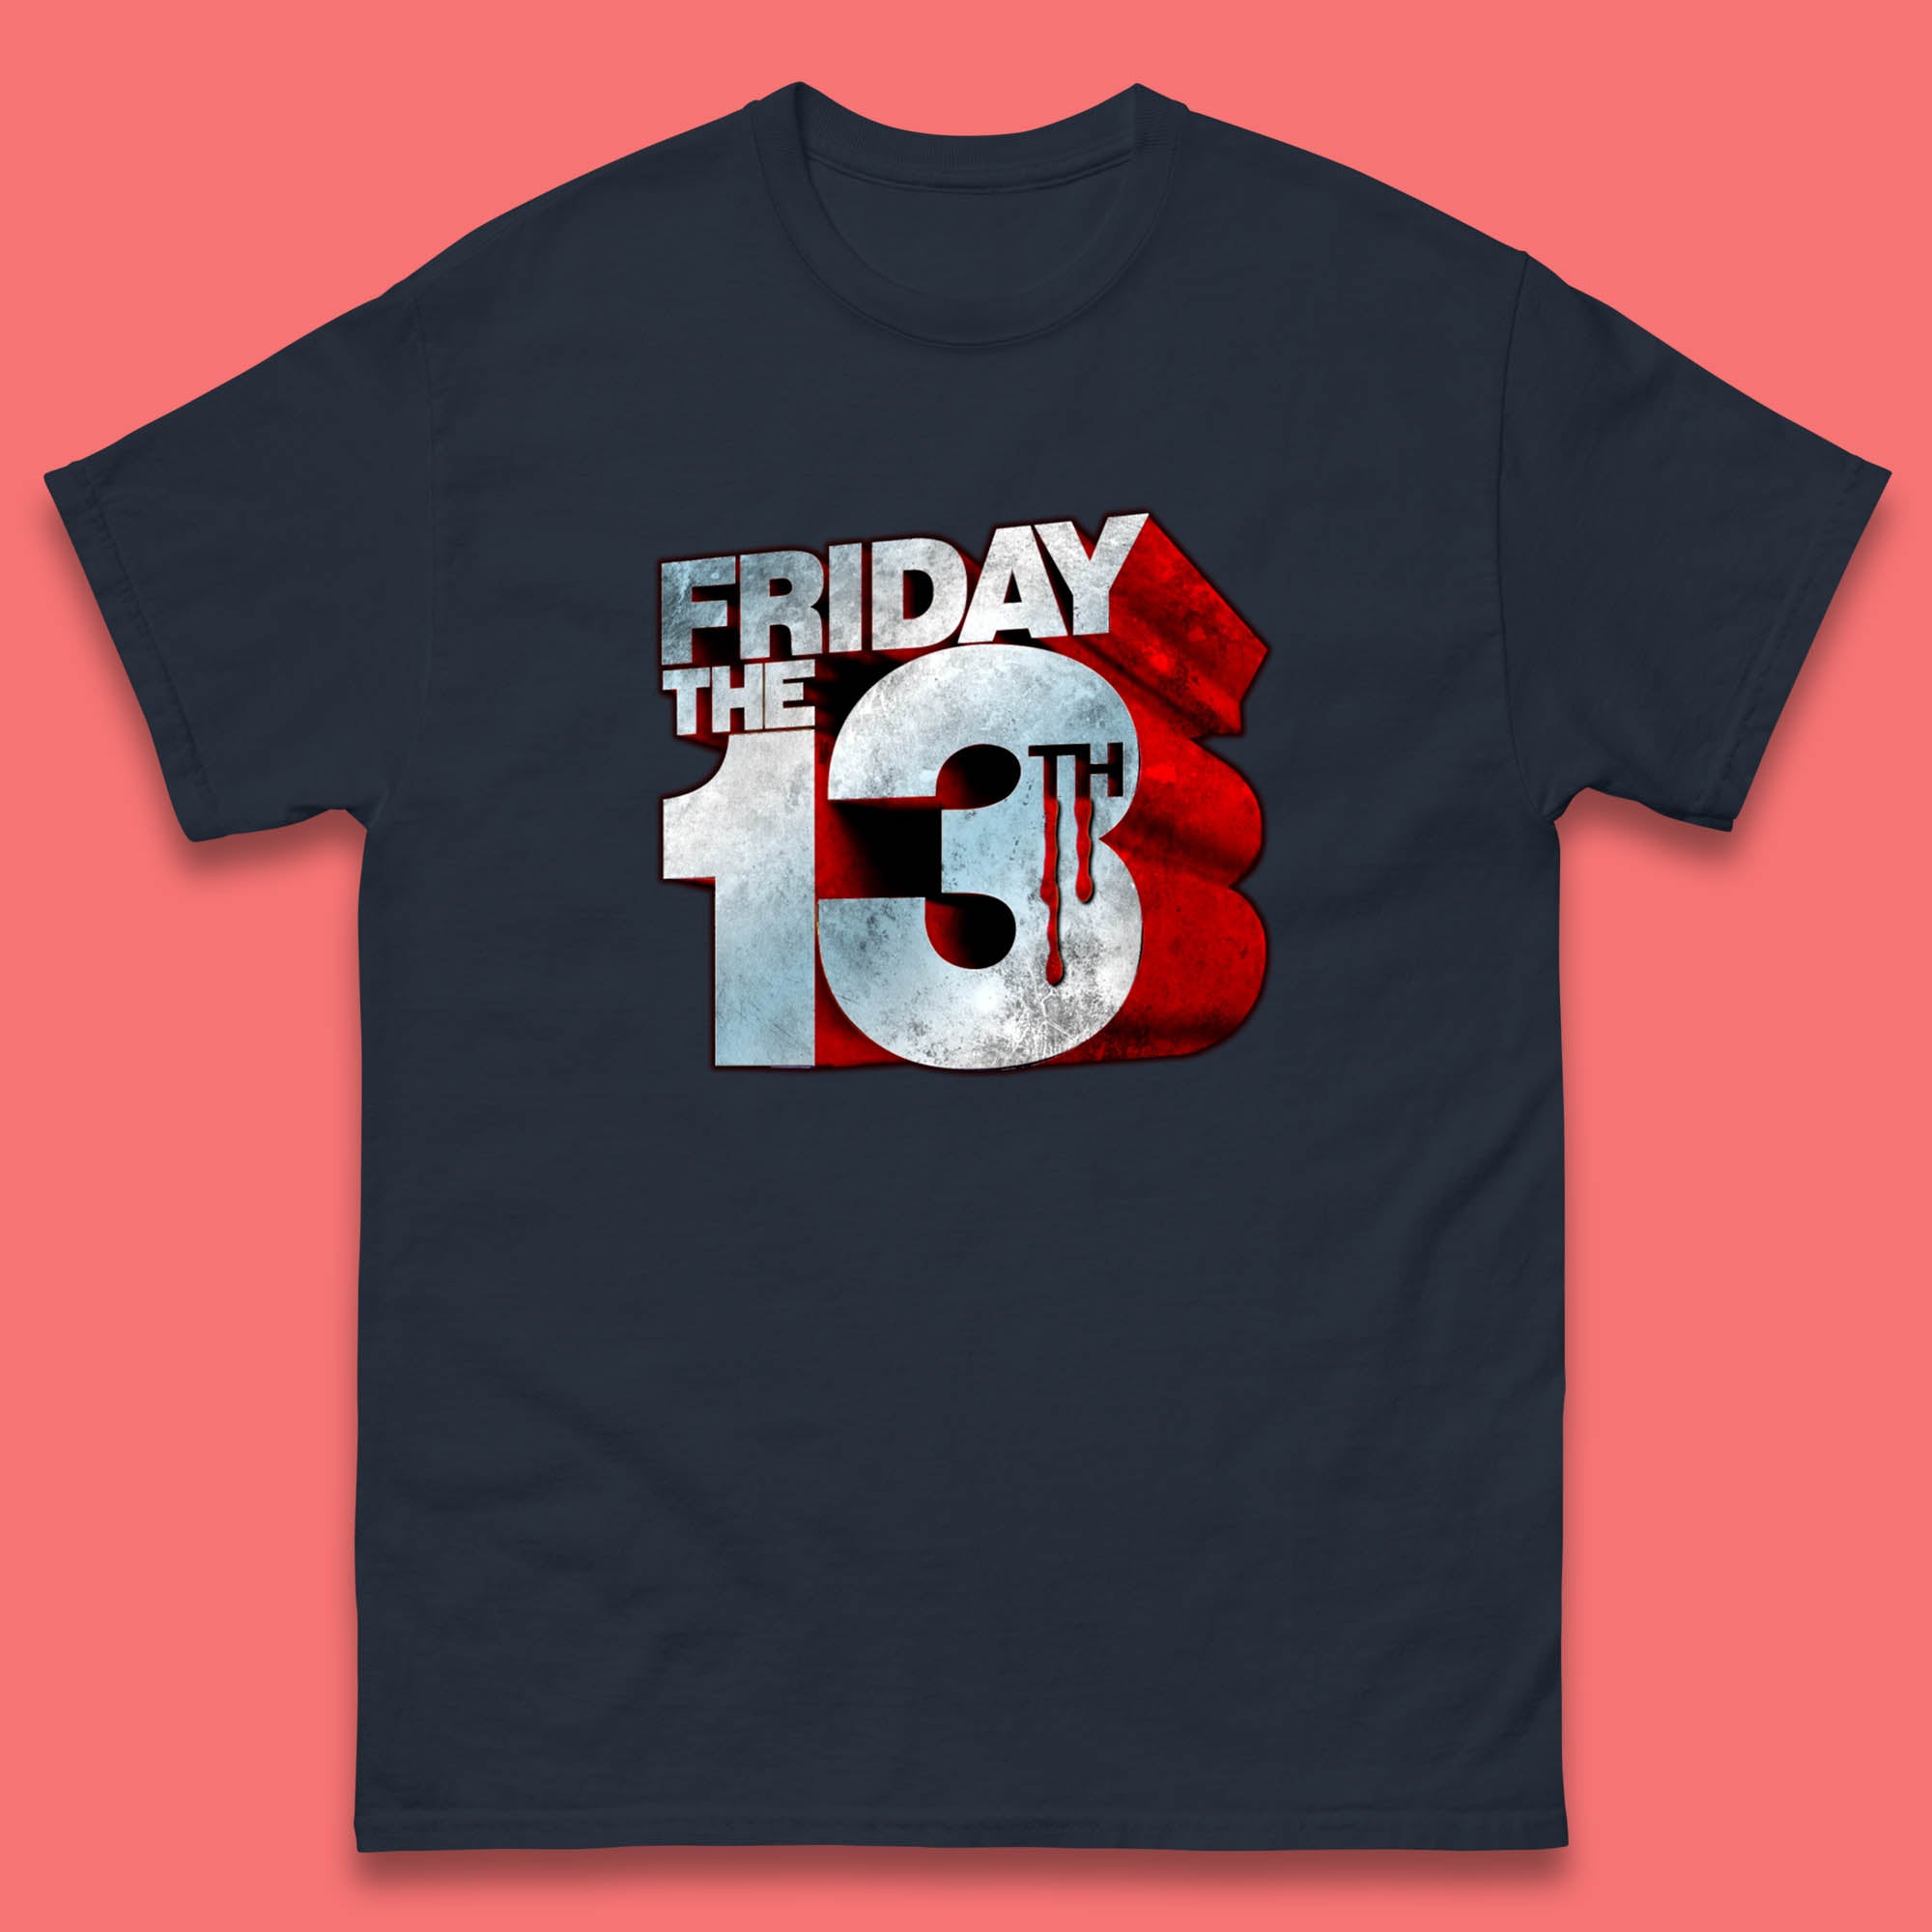 Halloween Friday The 13th Horror Movie Horror Classic 80s Movie Mens Tee Top